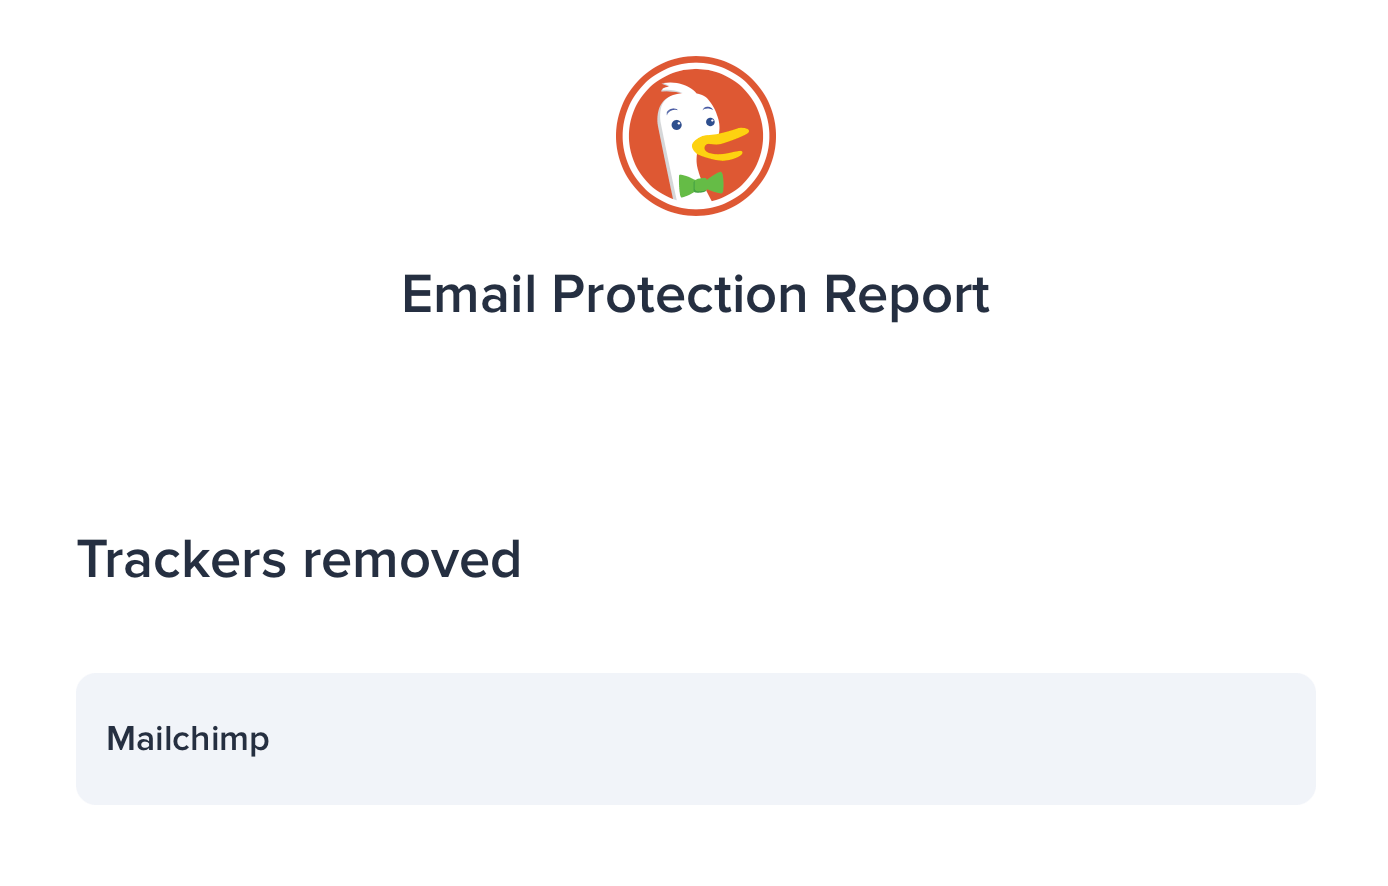 Email protection report showing one tracker